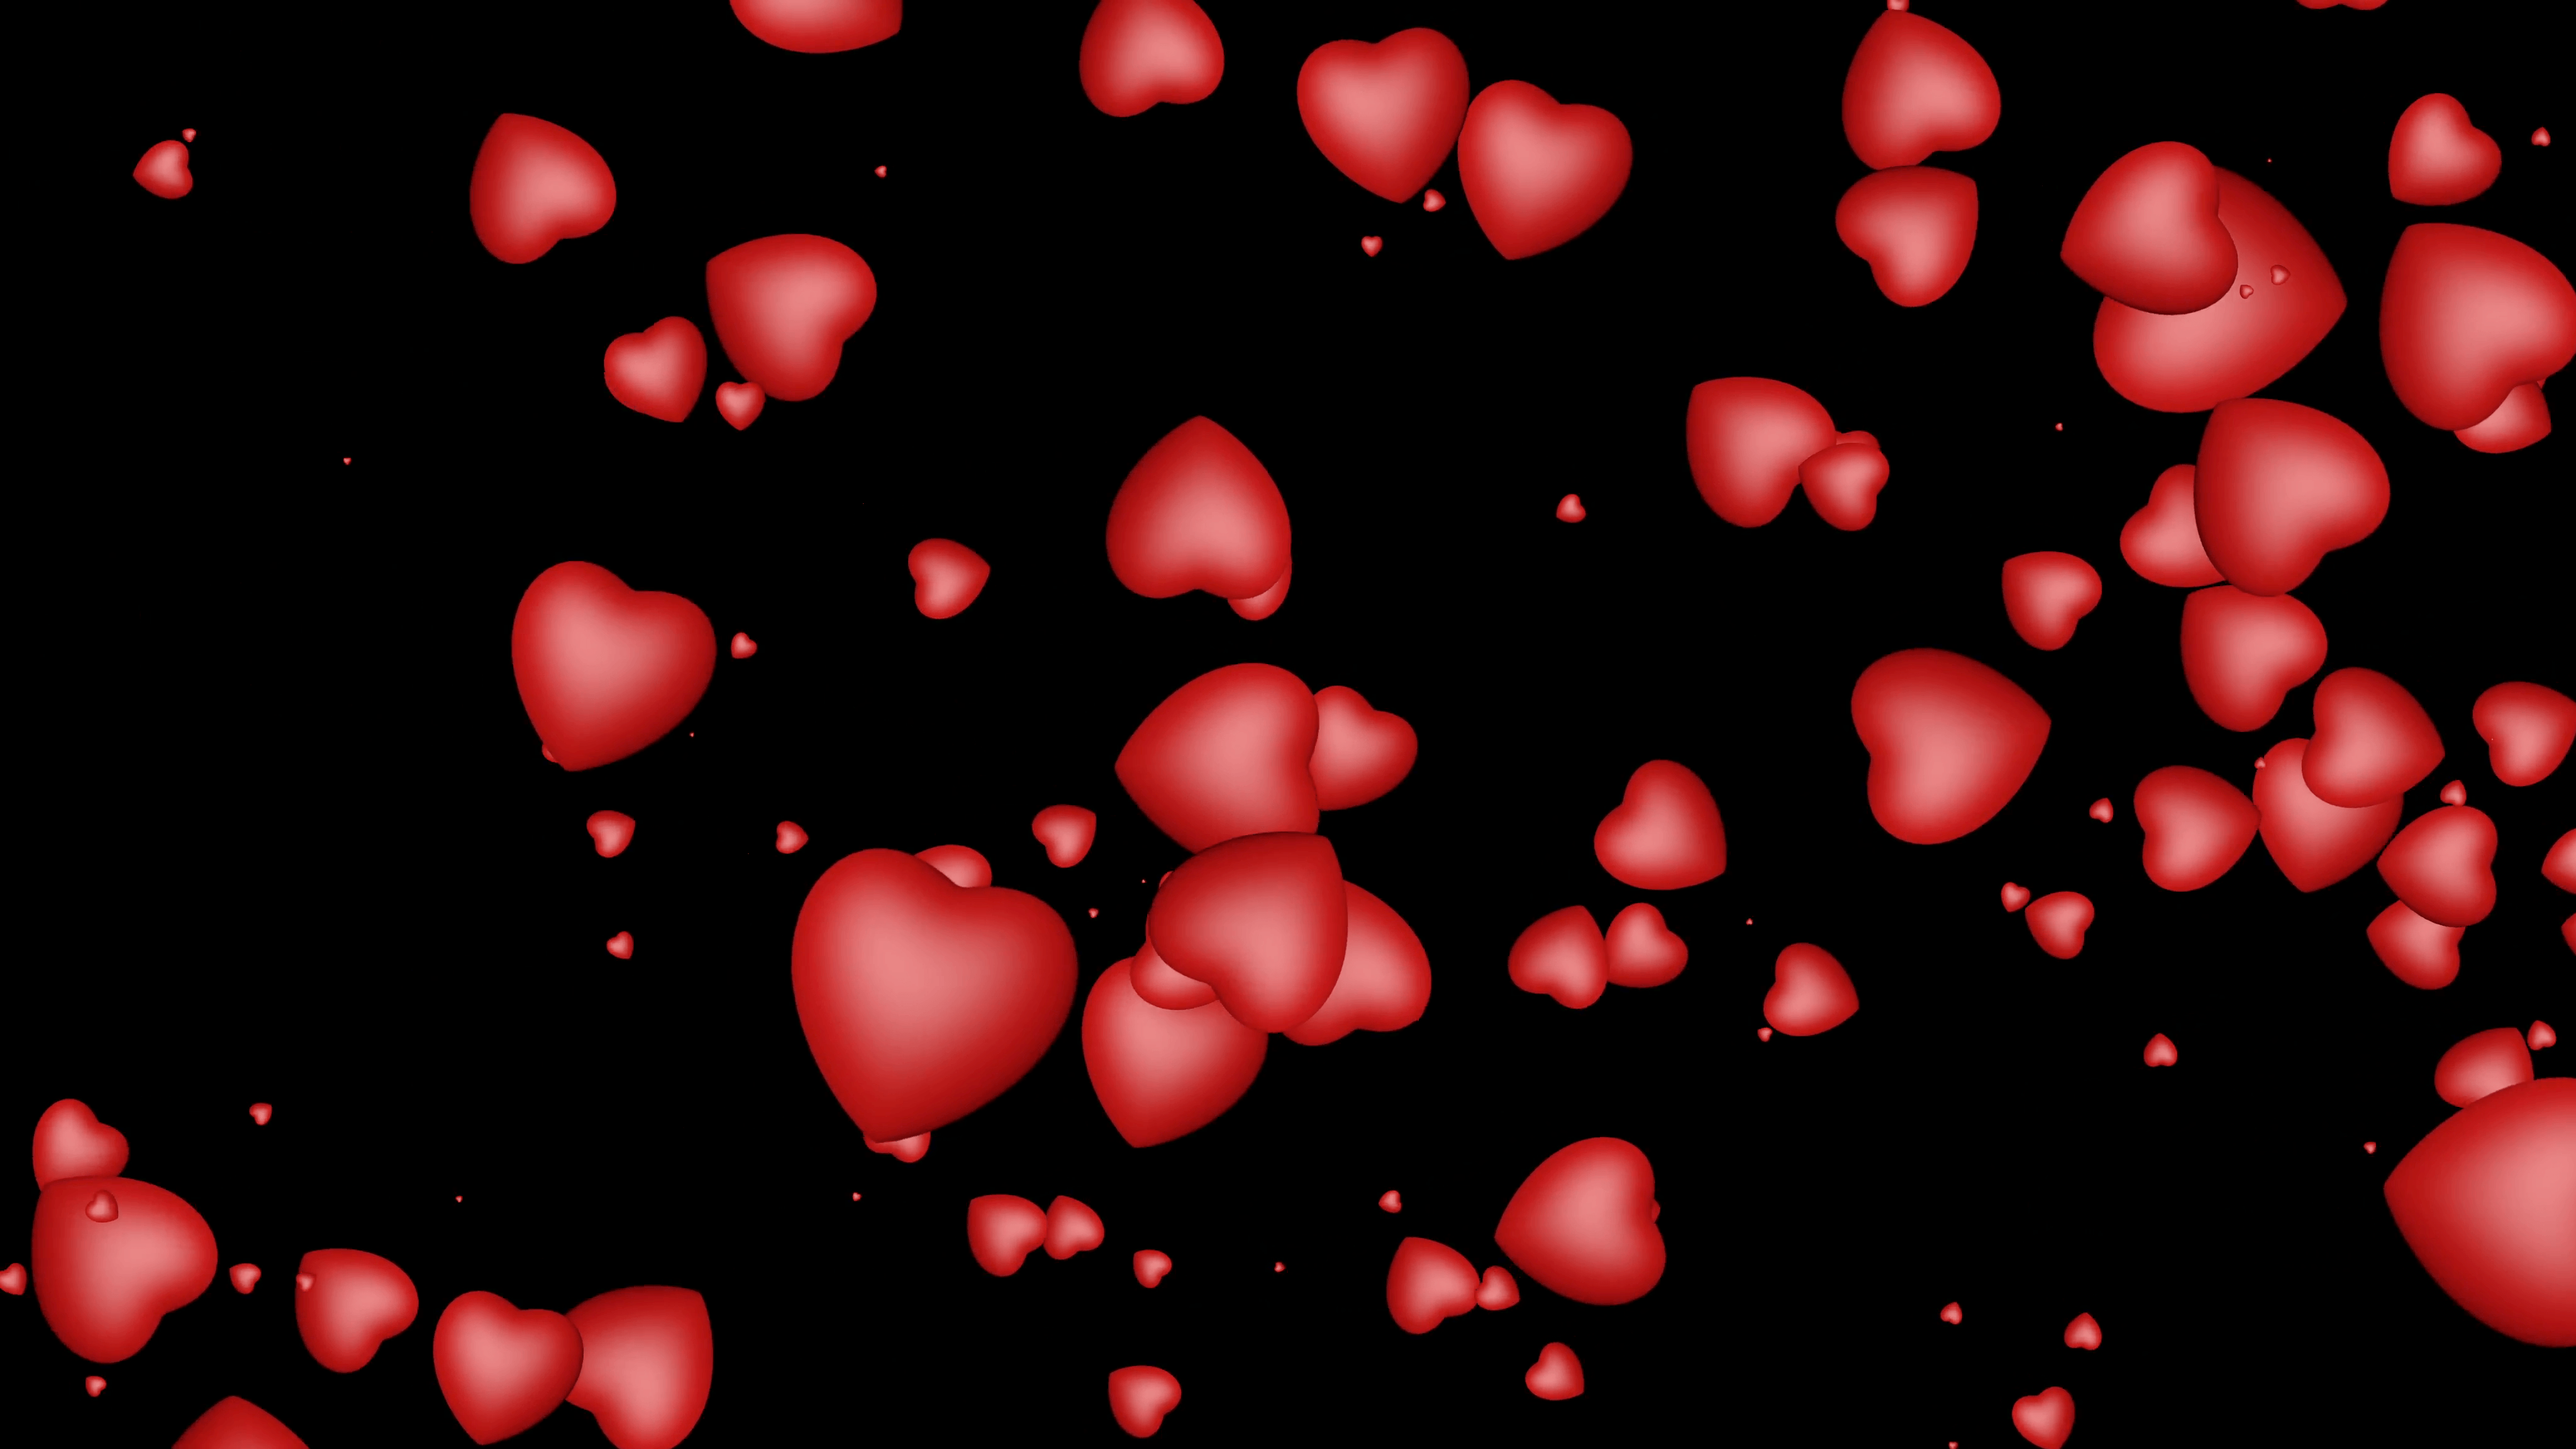 Red Hearts Black Backgrounds - Wallpaper Cave